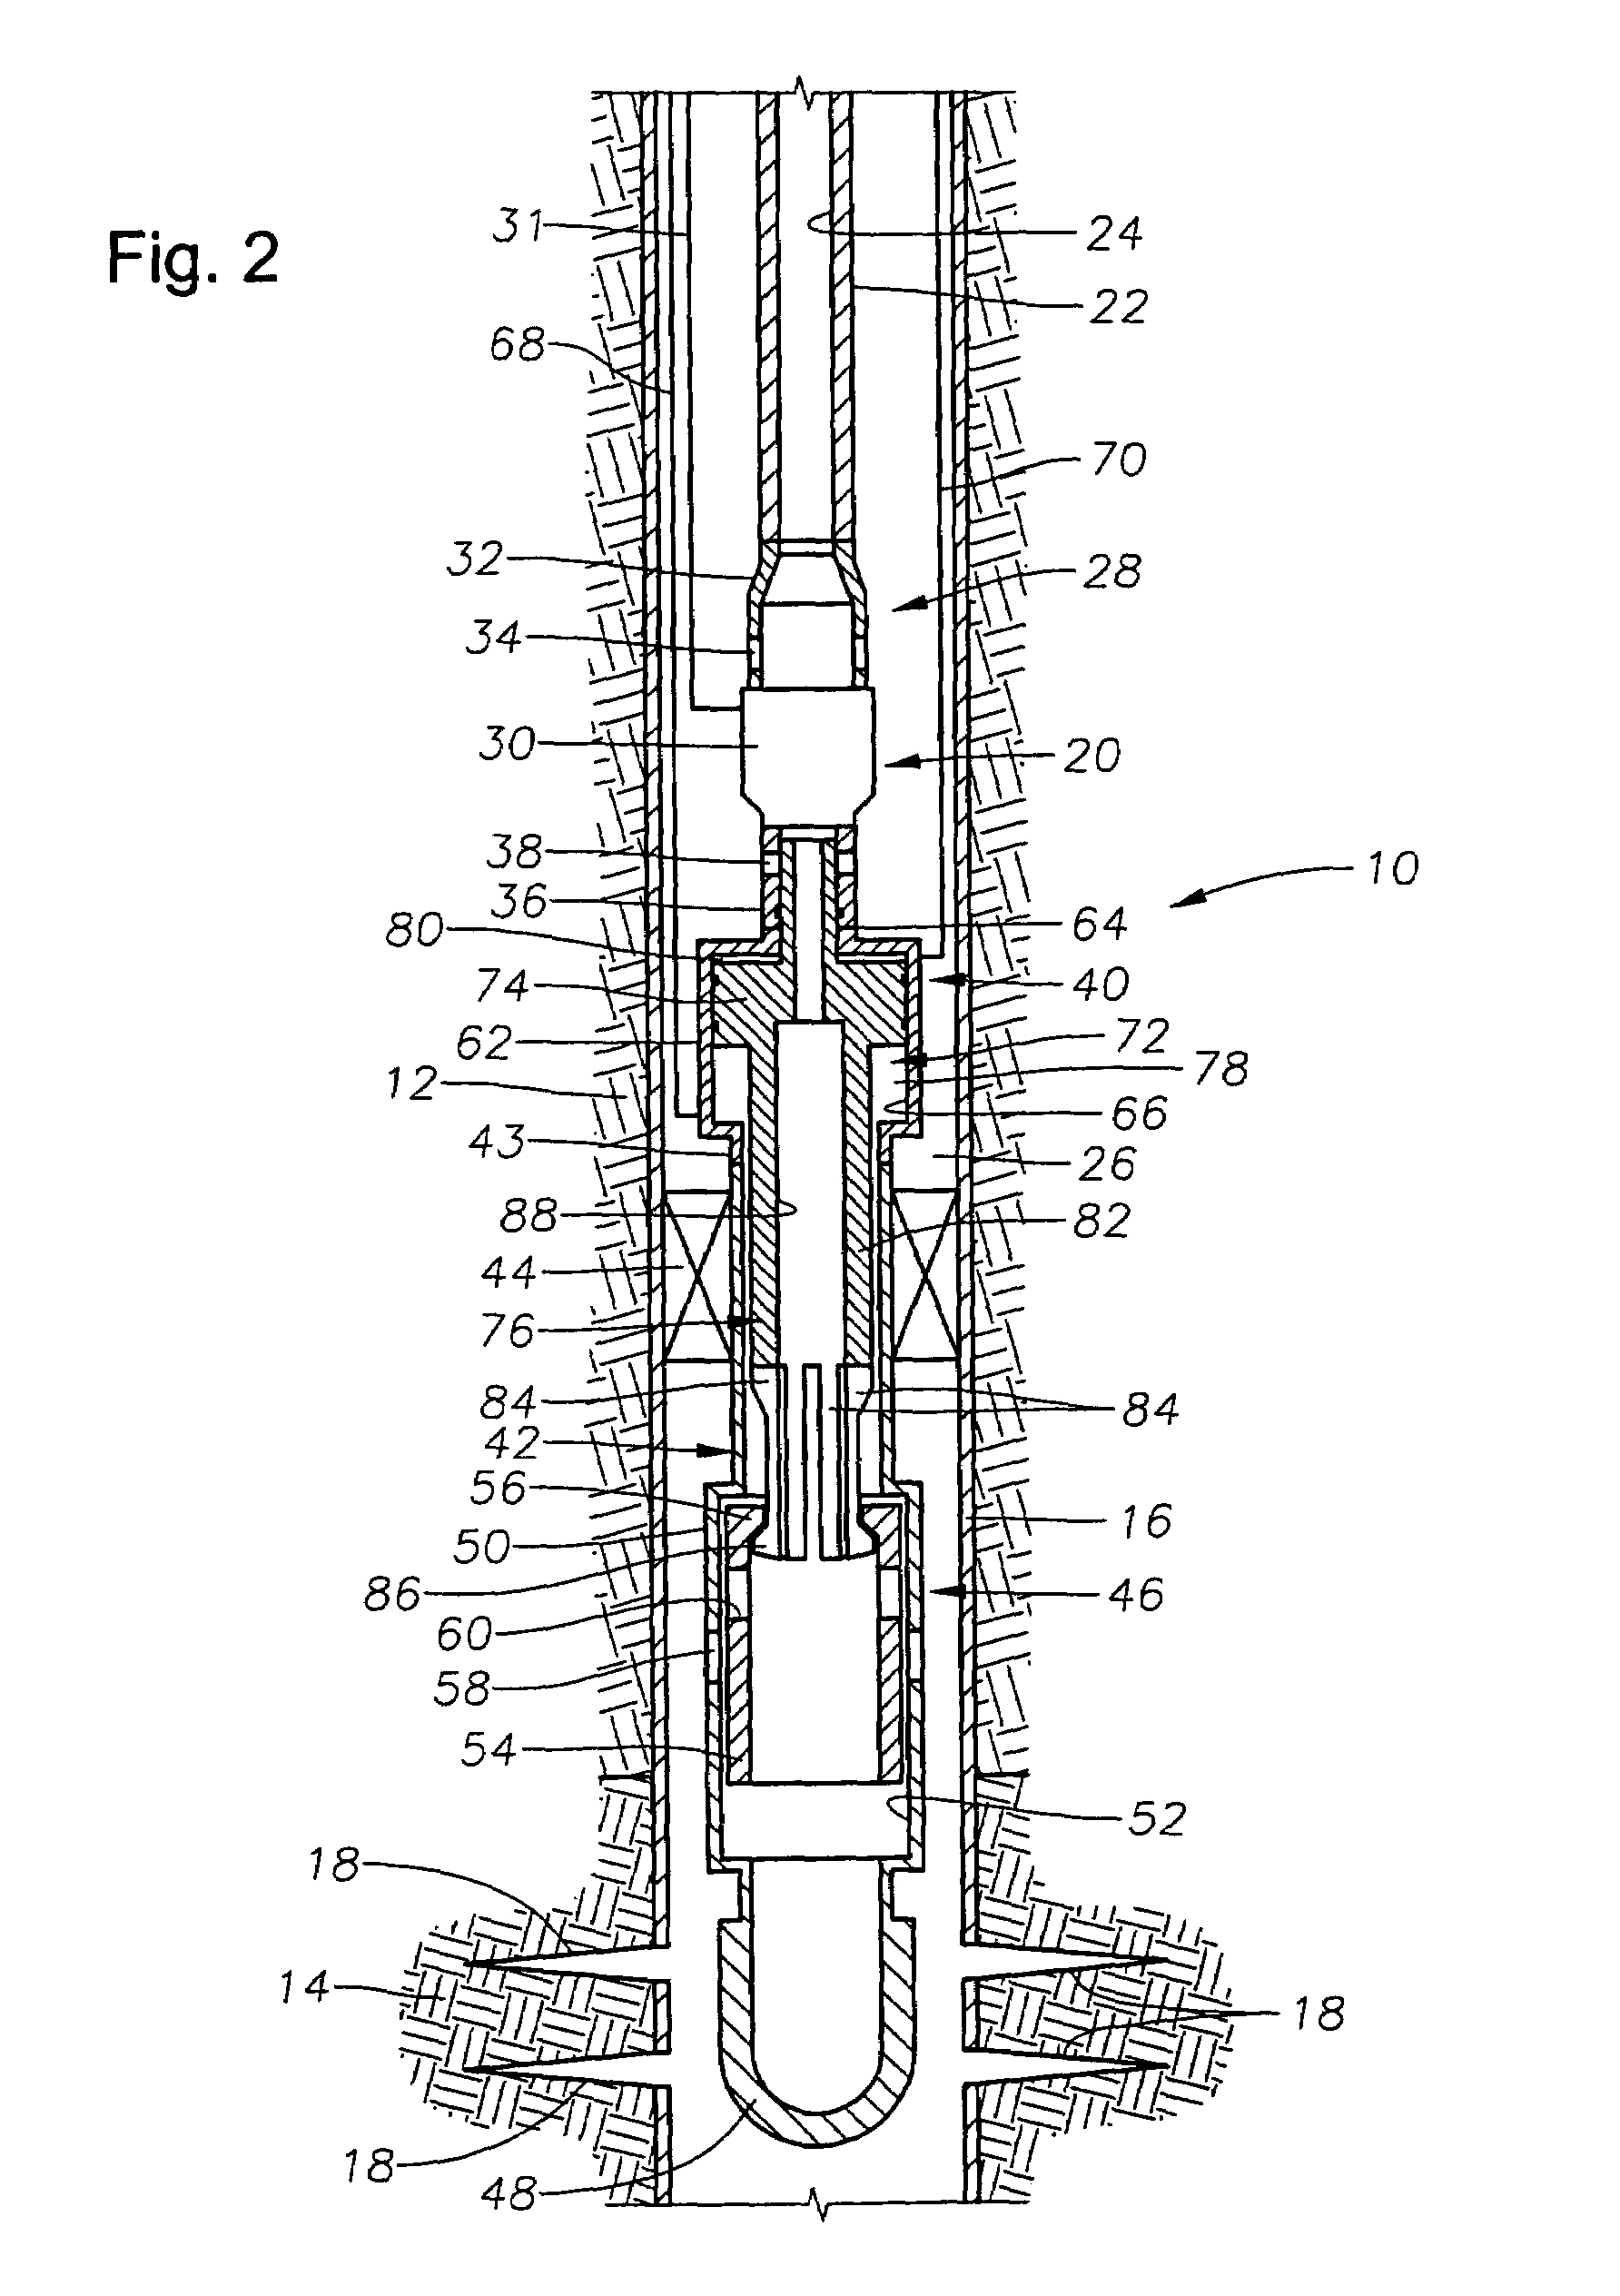 Method and apparatus to isolate a wellbore during pump workover